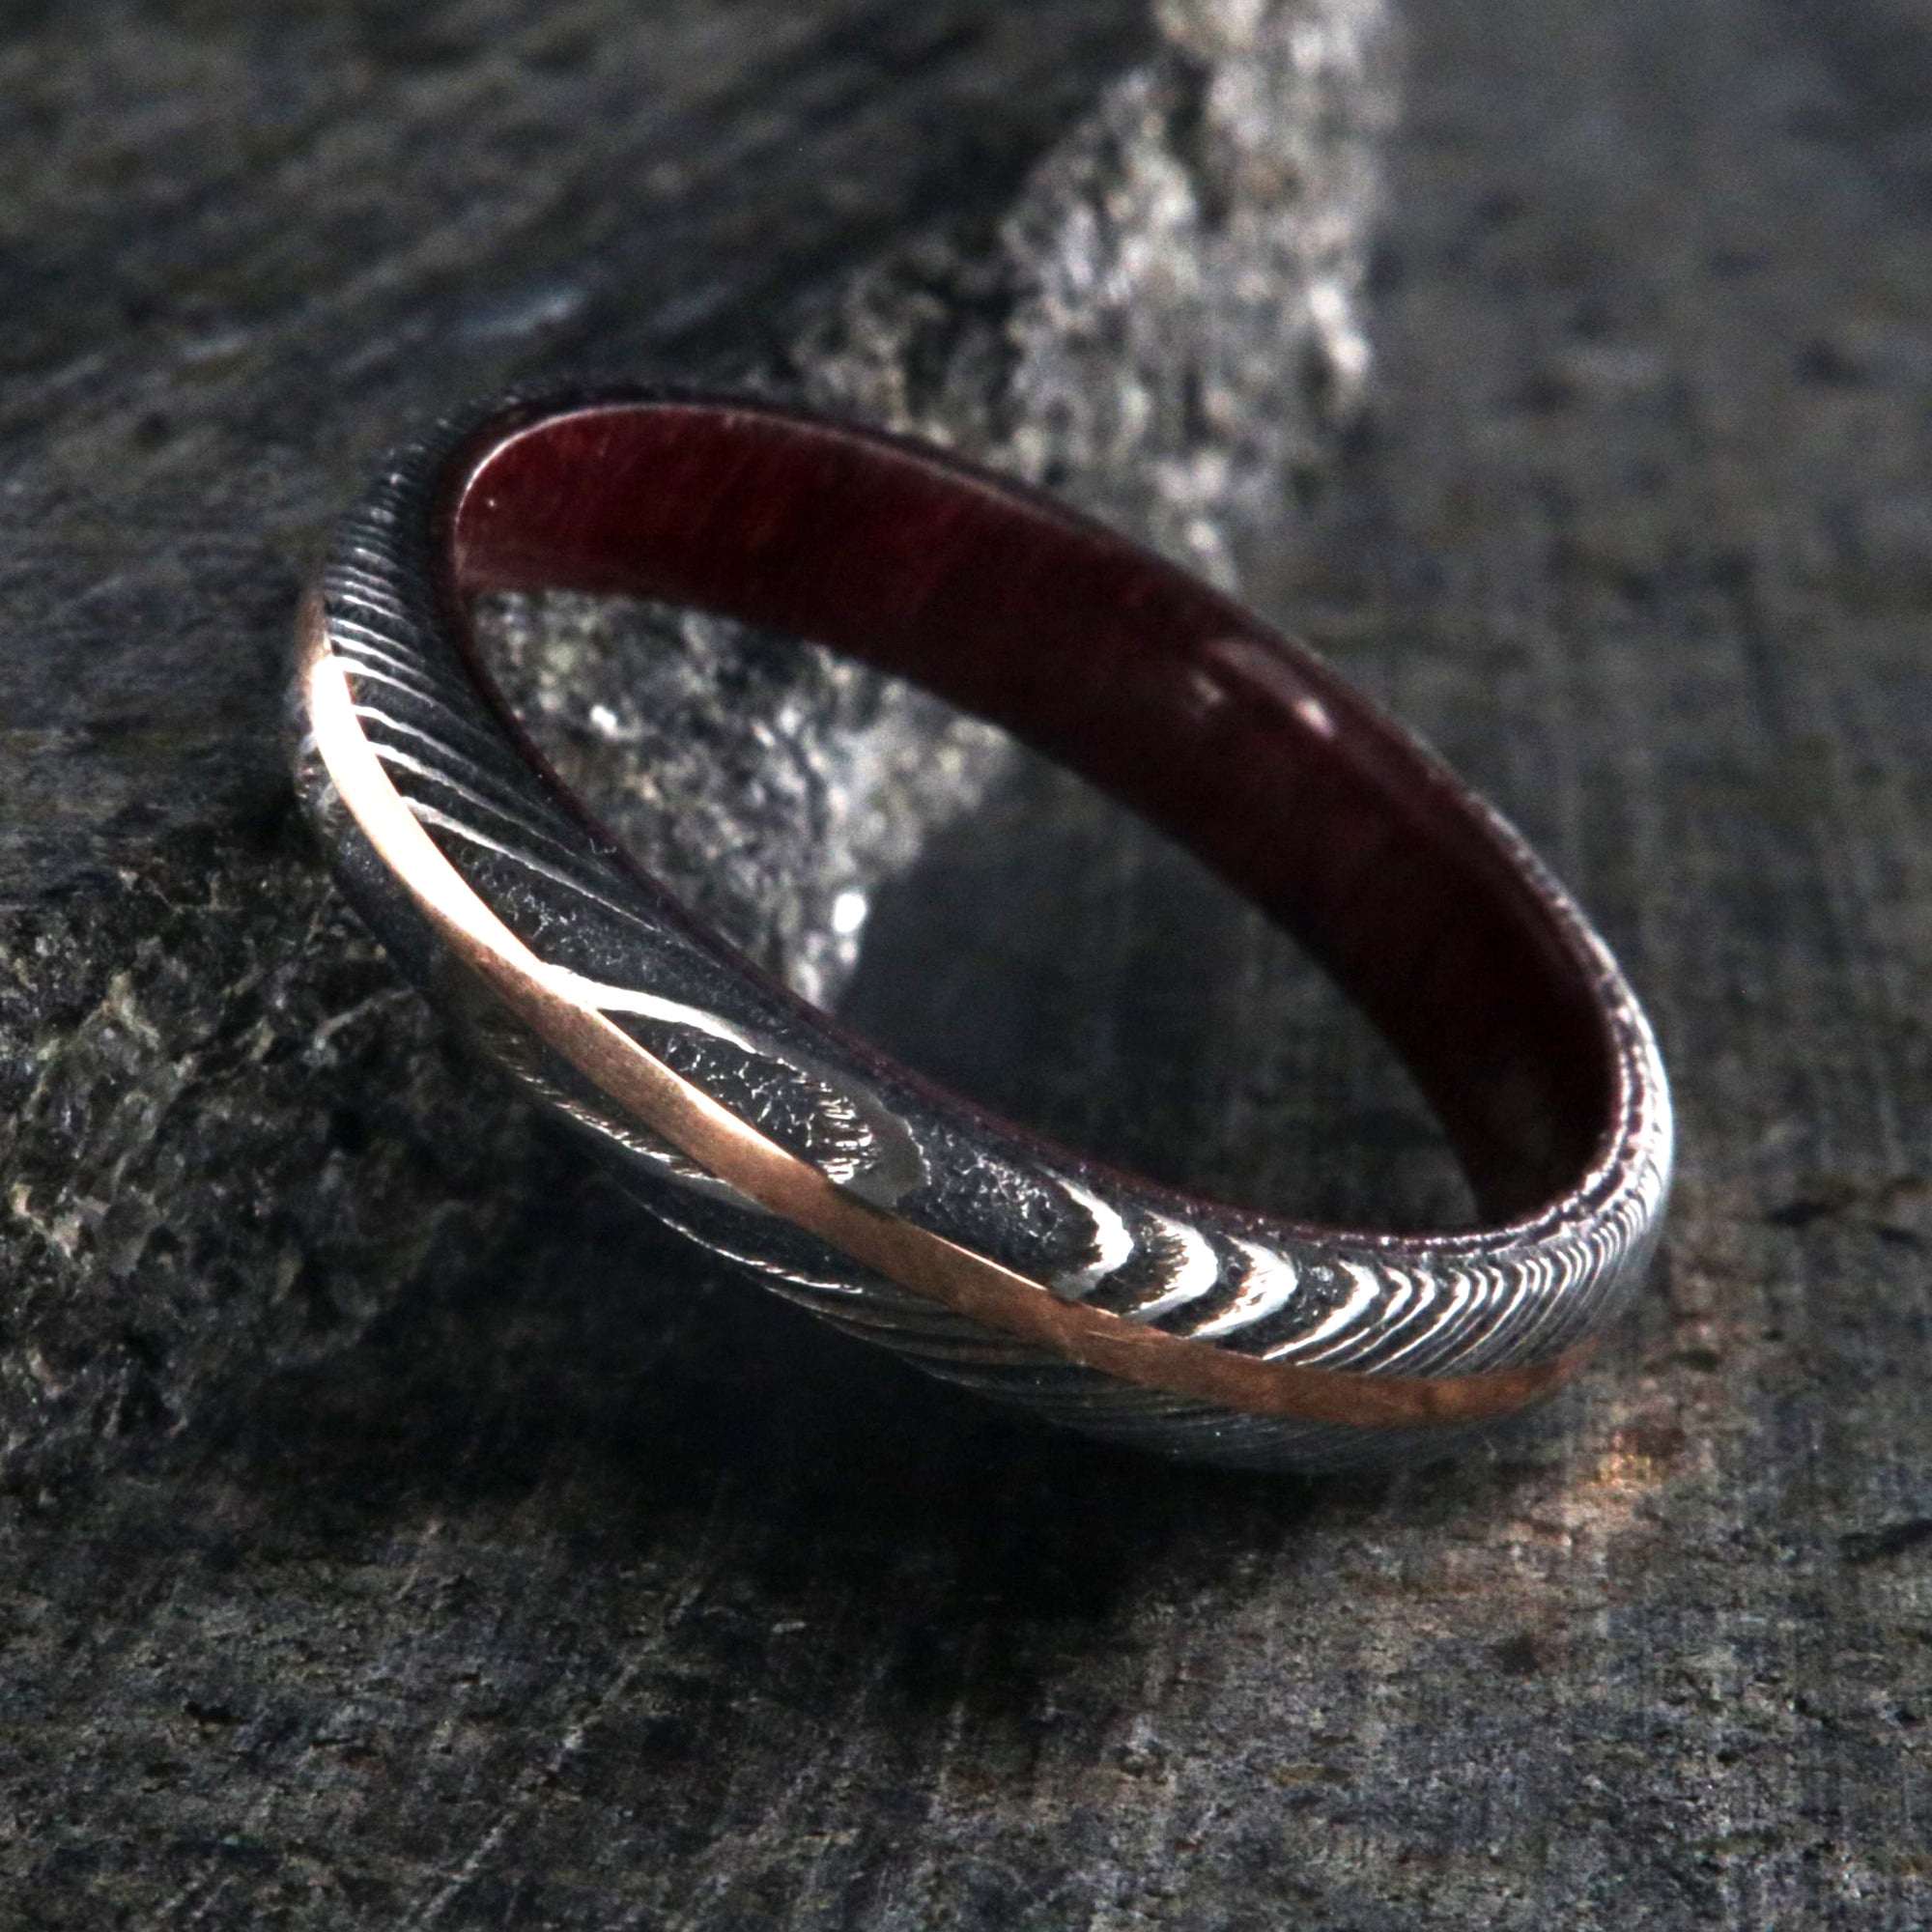 4mm wide women's wedding band made with black Damascus steel with a centered rose gold inlay and purple rain wood sleeve